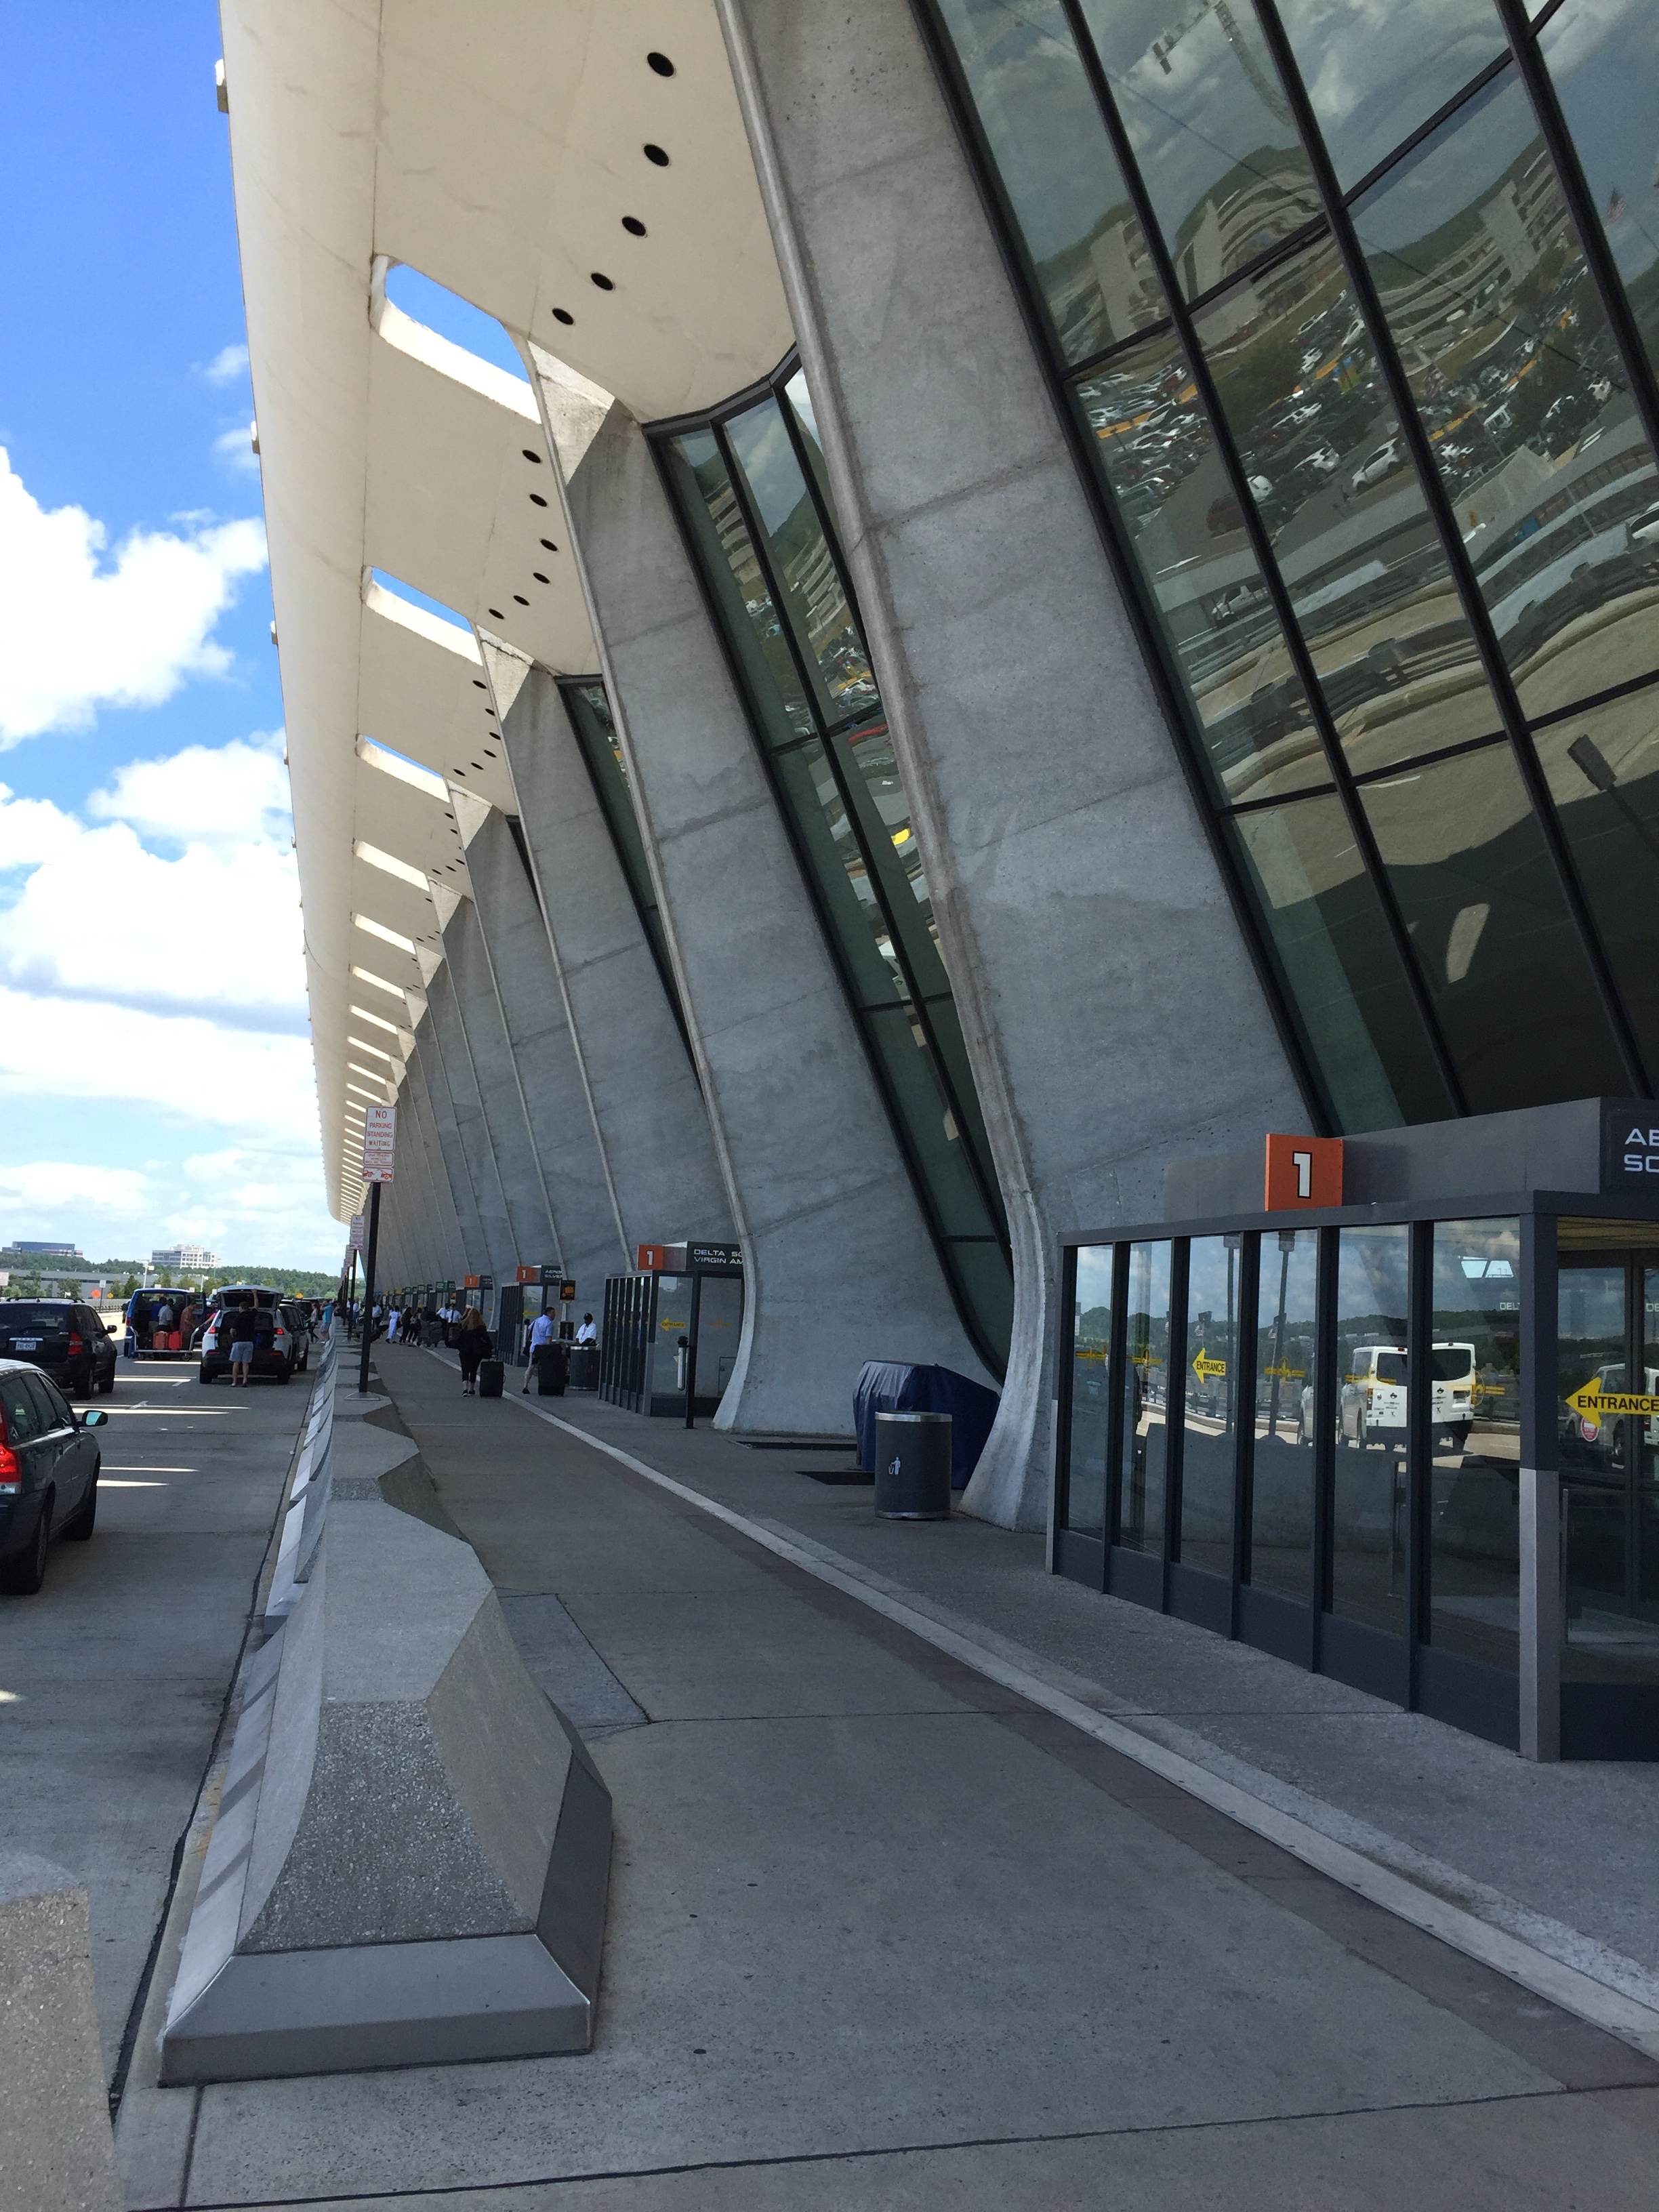 Is Washington Dulles America's Best Worst Airport? — people[PLACES ...